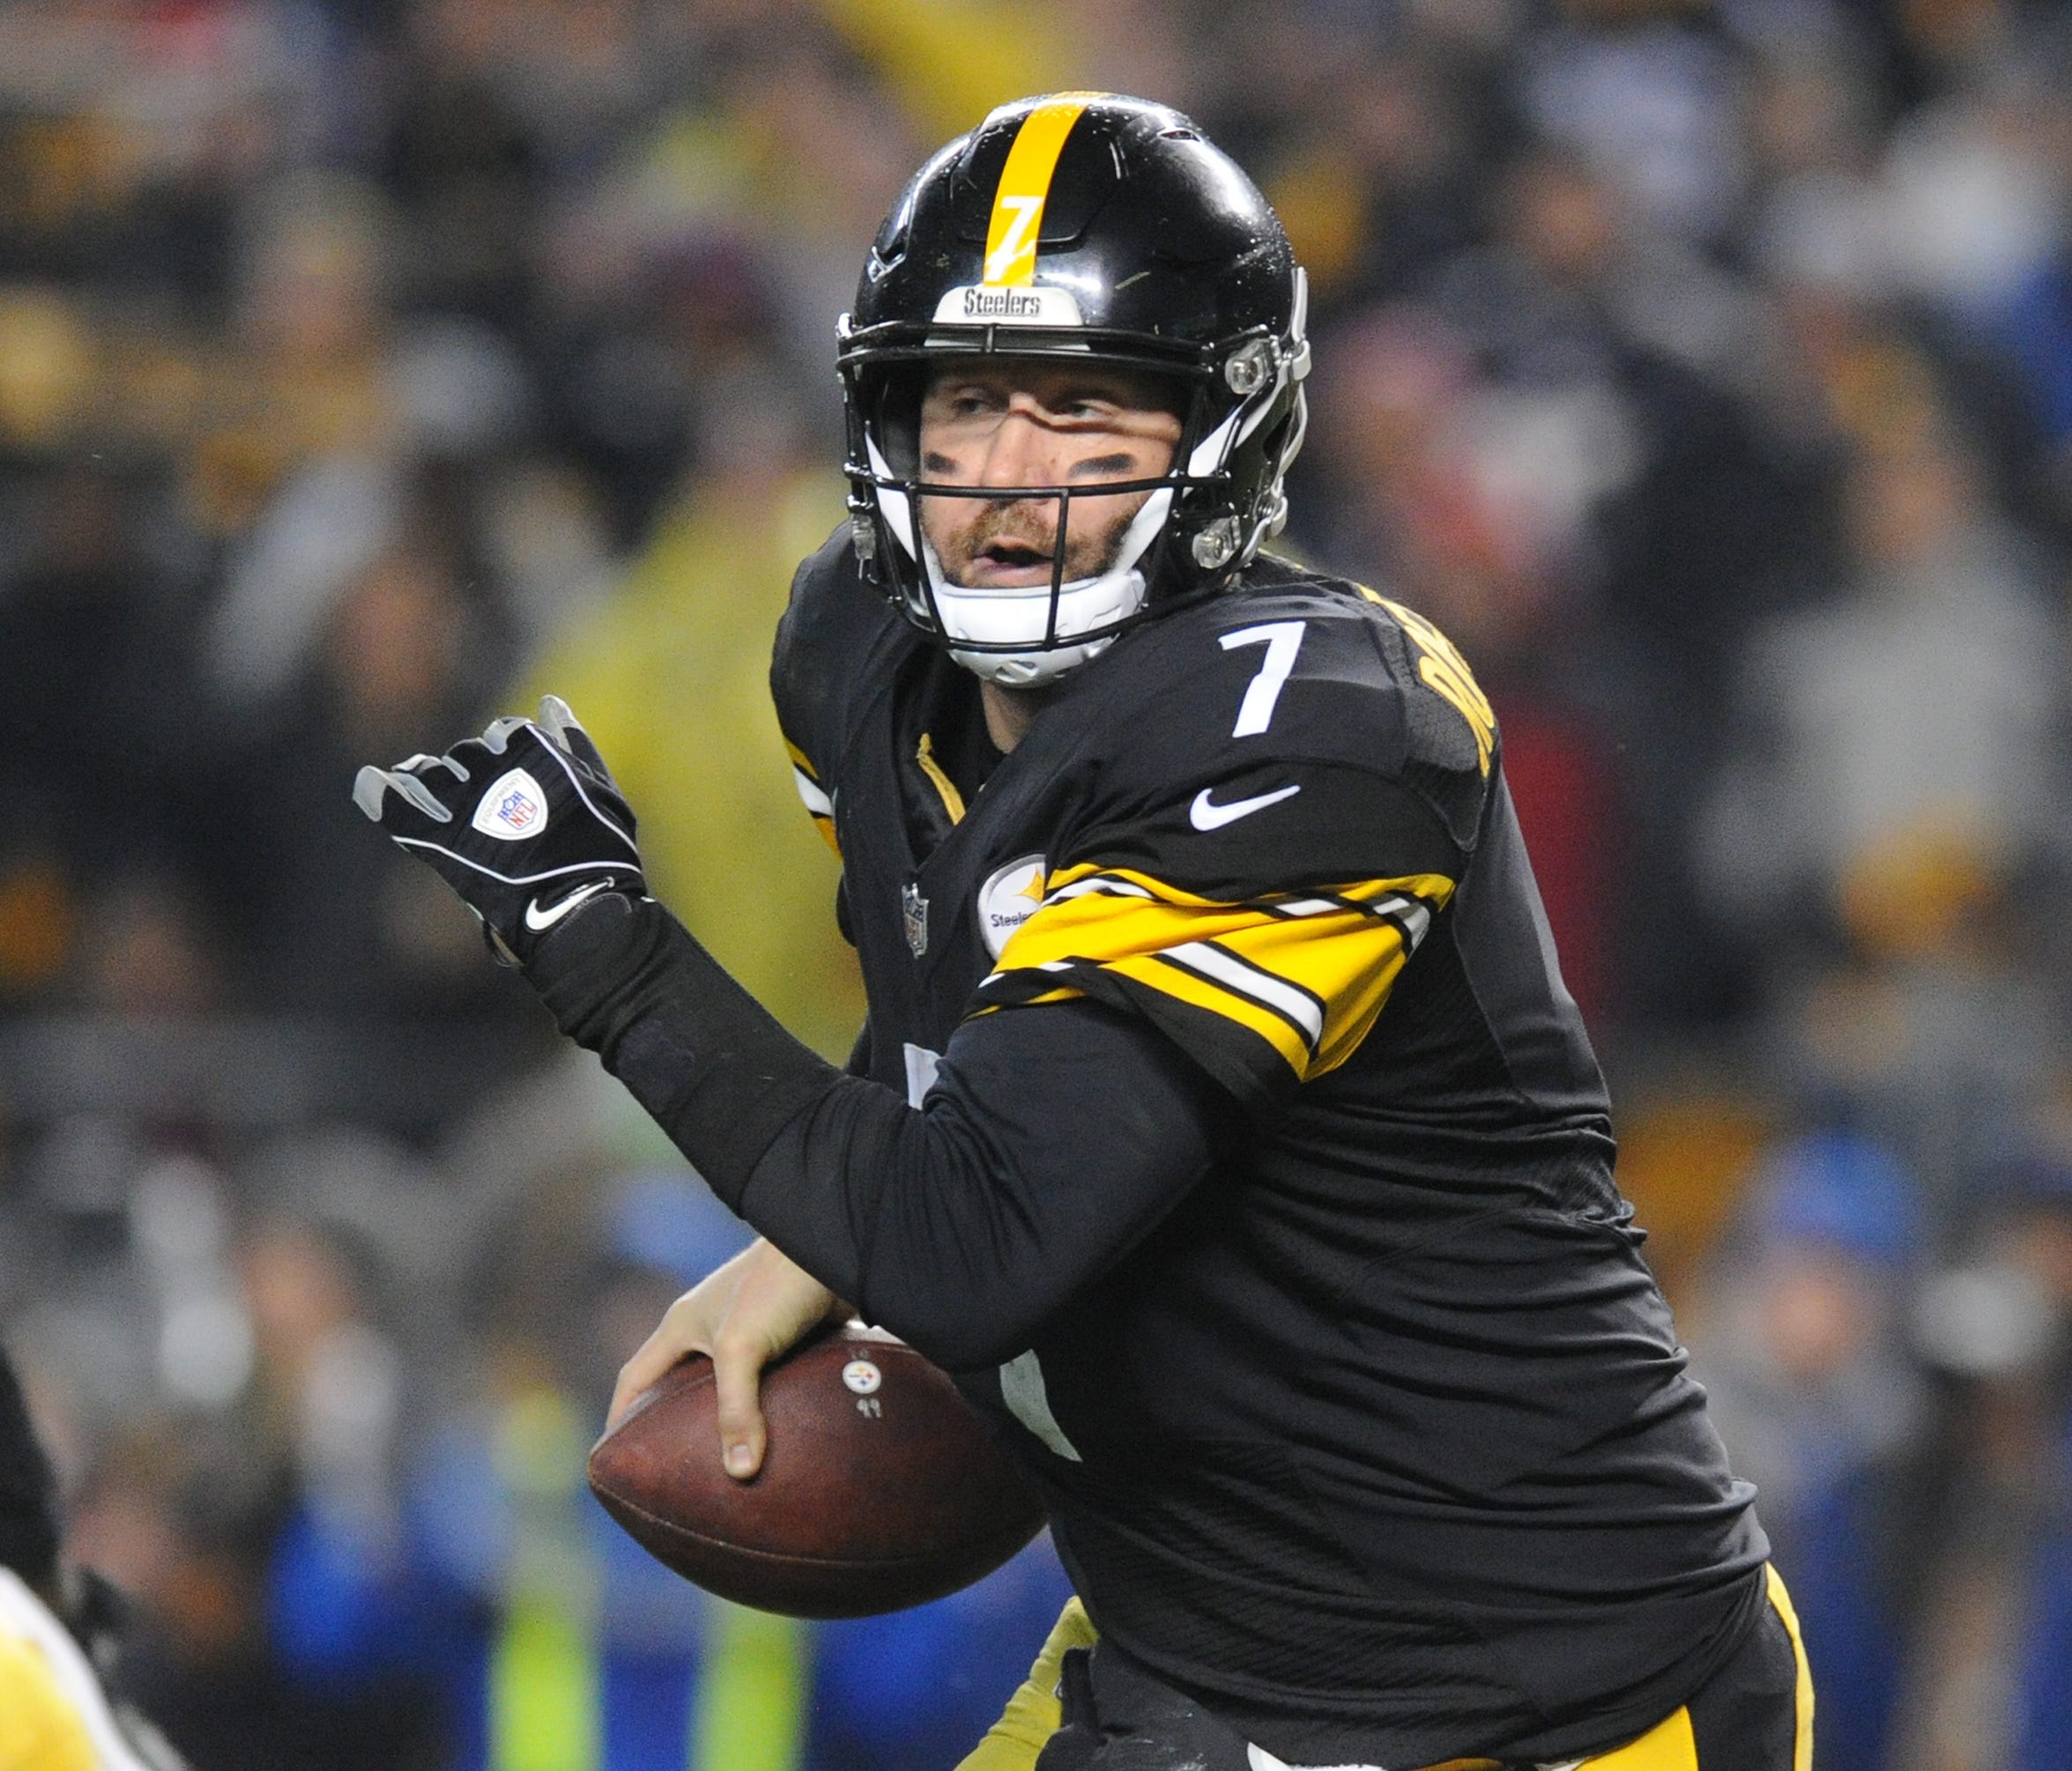 Pittsburgh Steelers quarterback Ben Roethlisberger (7) scrambles in the fourth quarter against the New England Patriots at Heinz Field.